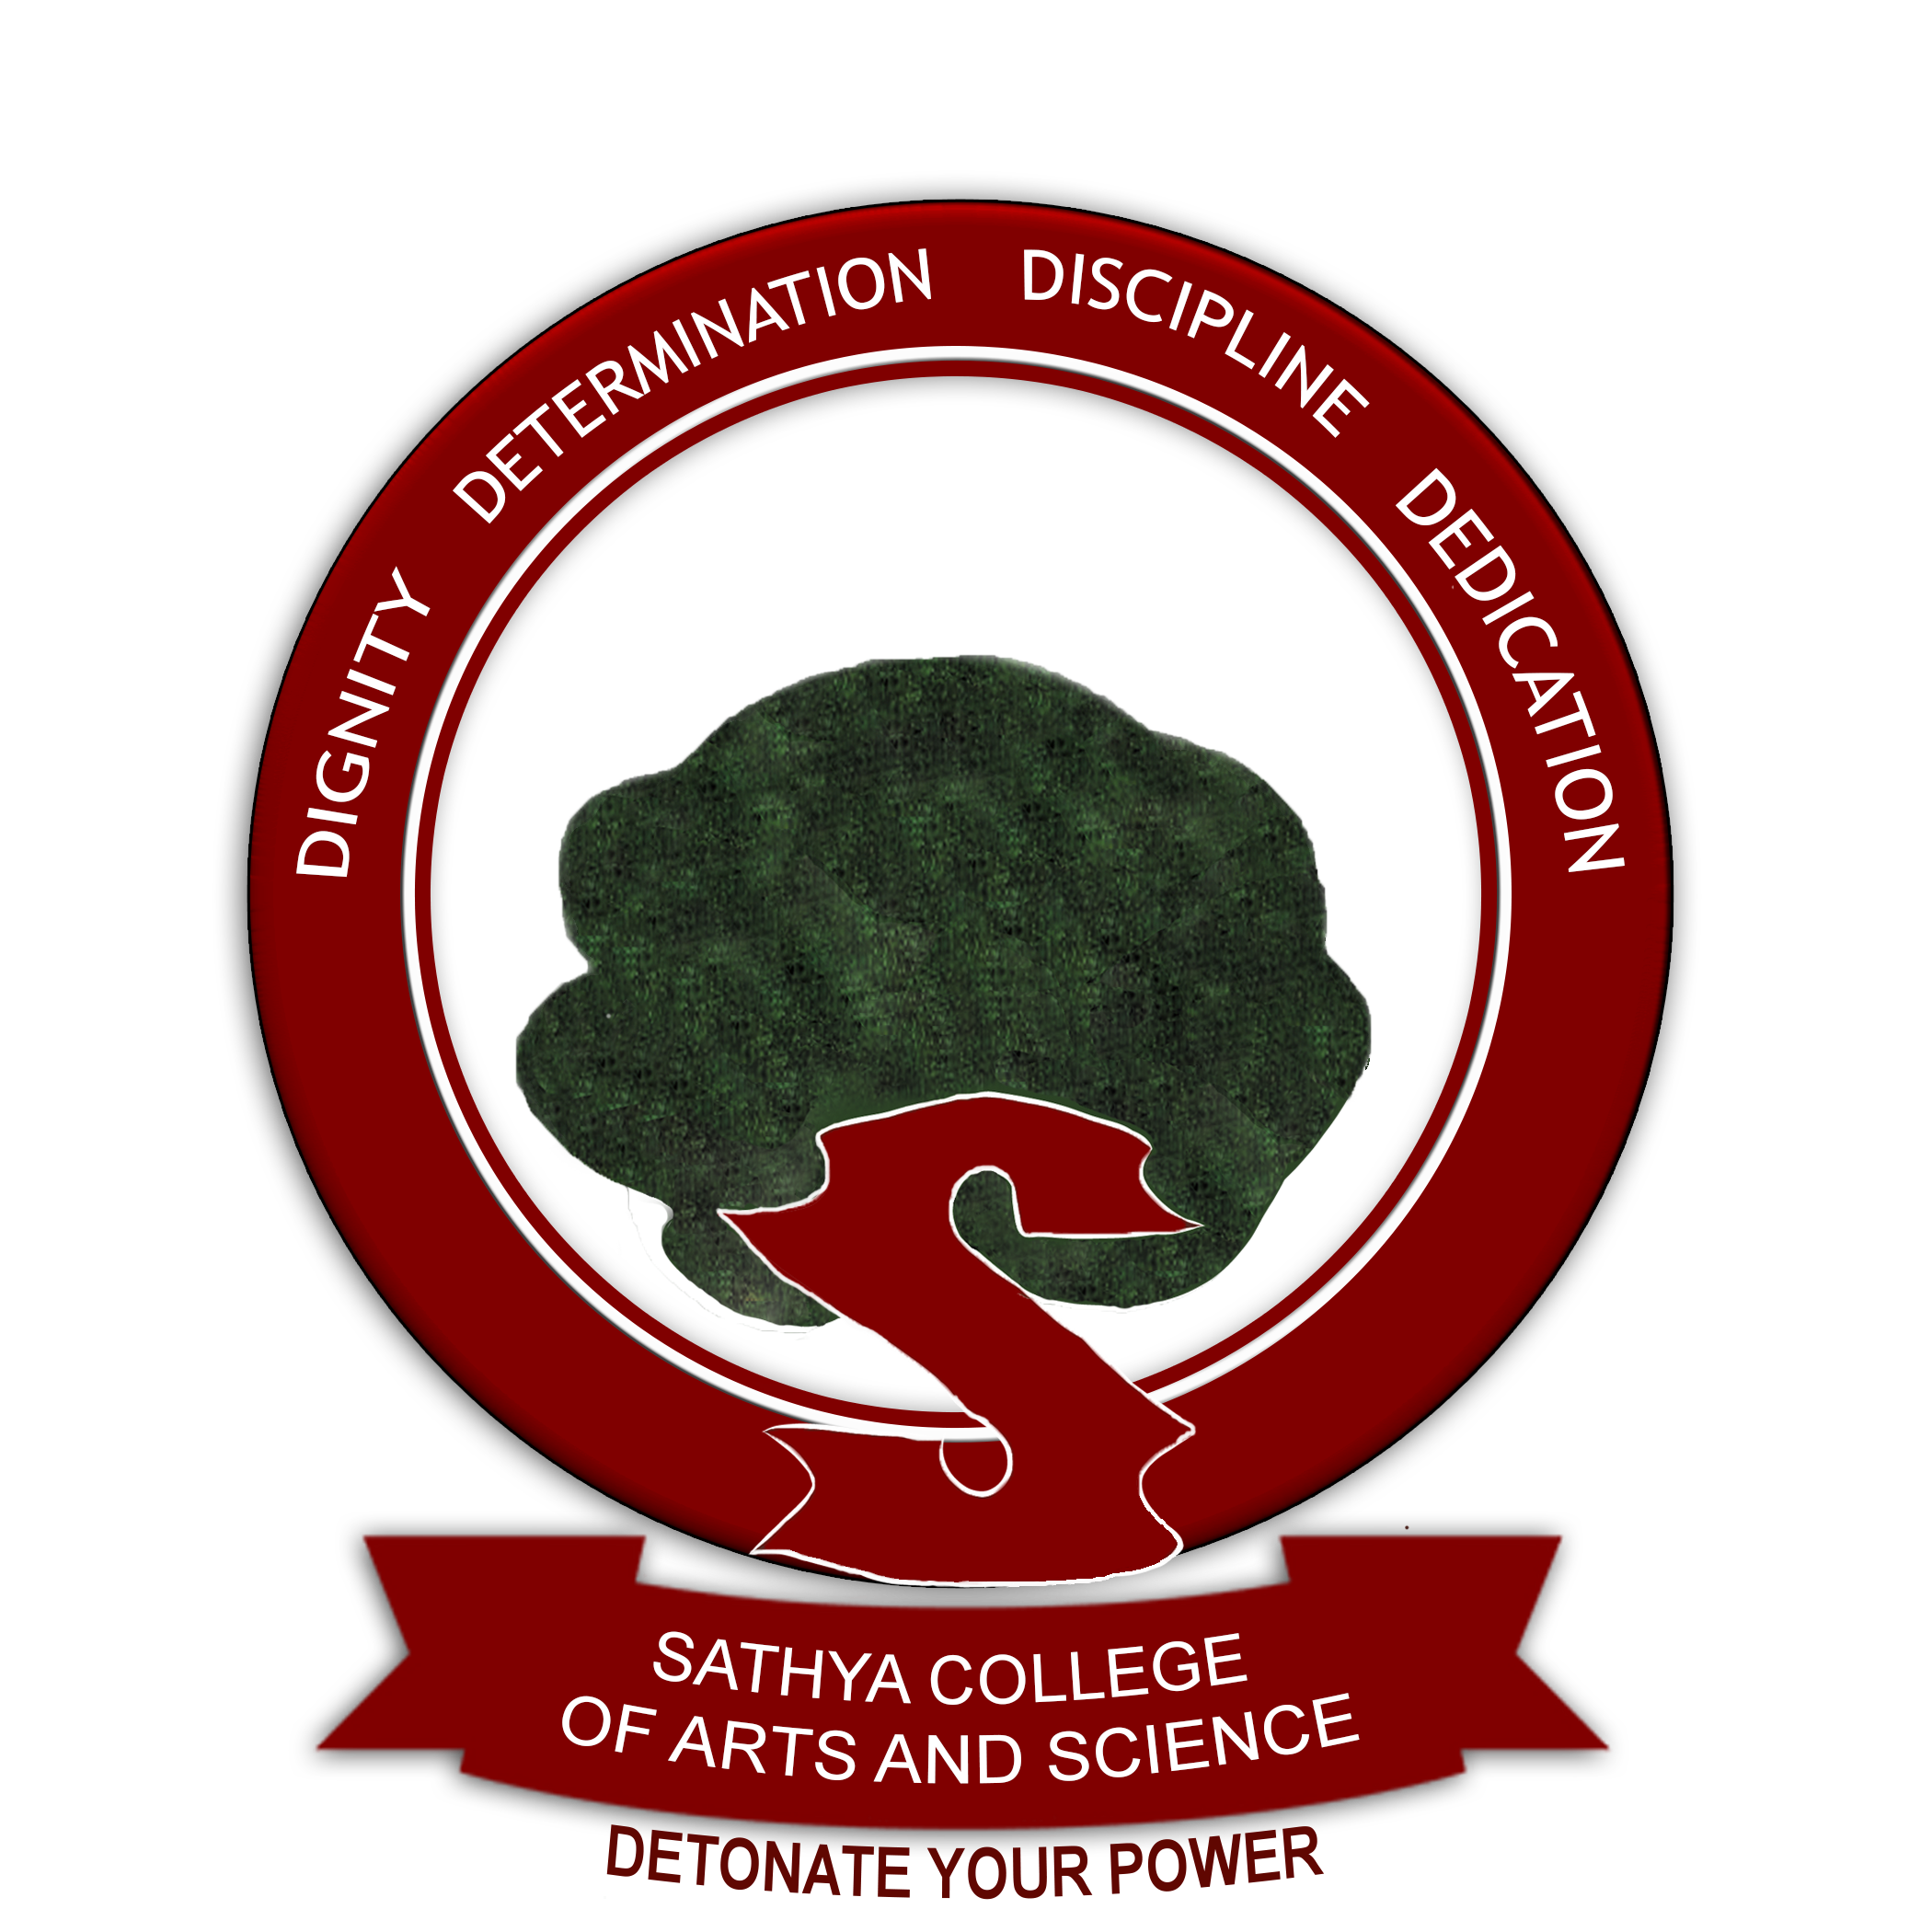 Sathya College of Arts and Science, Vellore